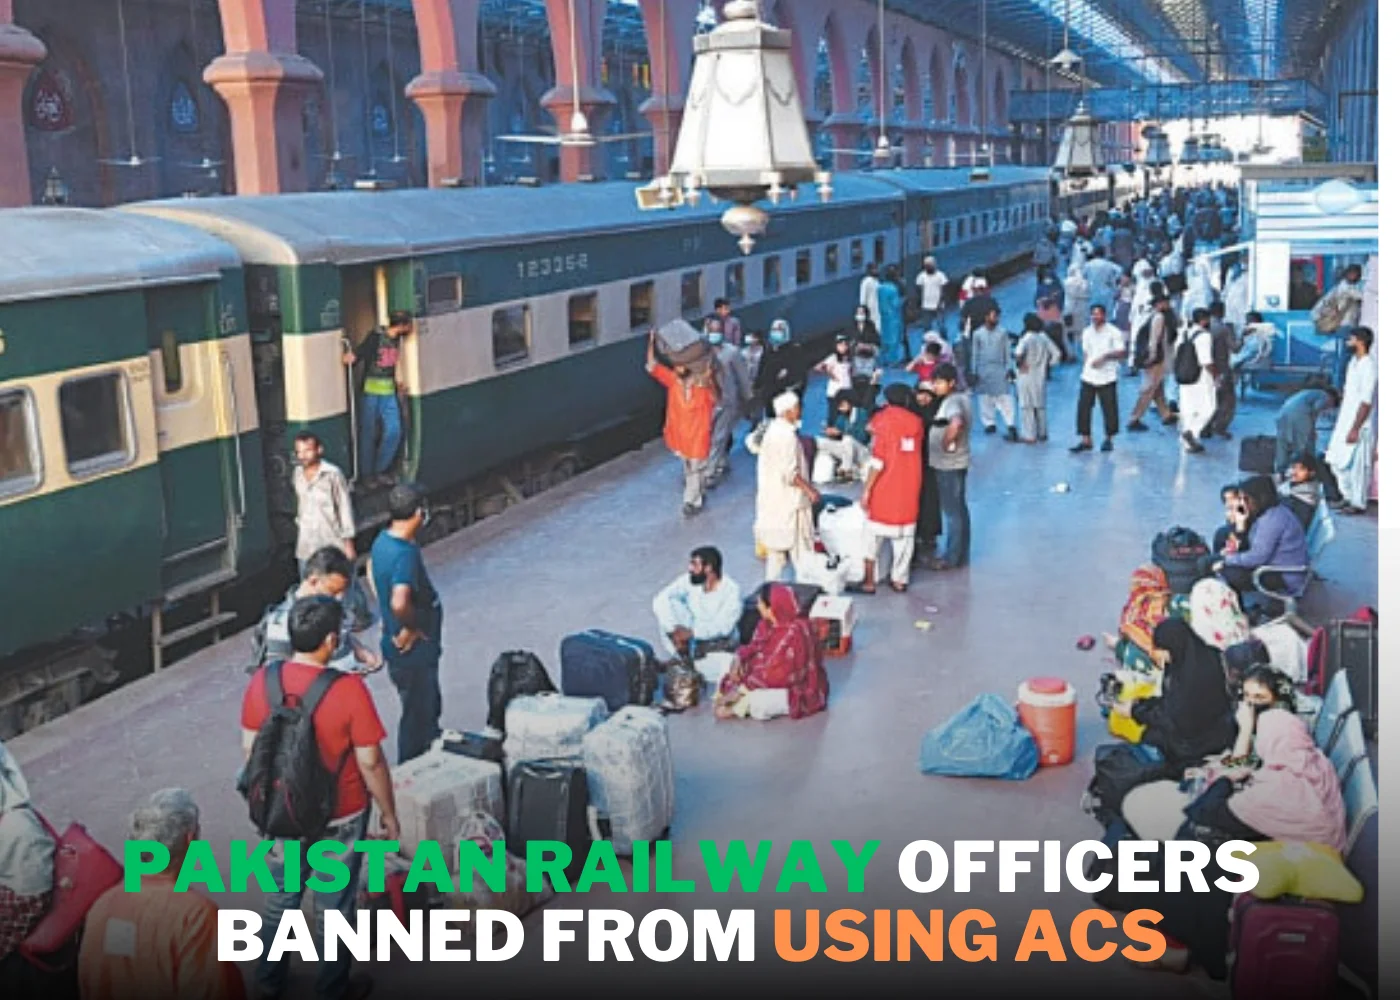 Pakistan Railway Officers Banned from Using ACs to Save Money